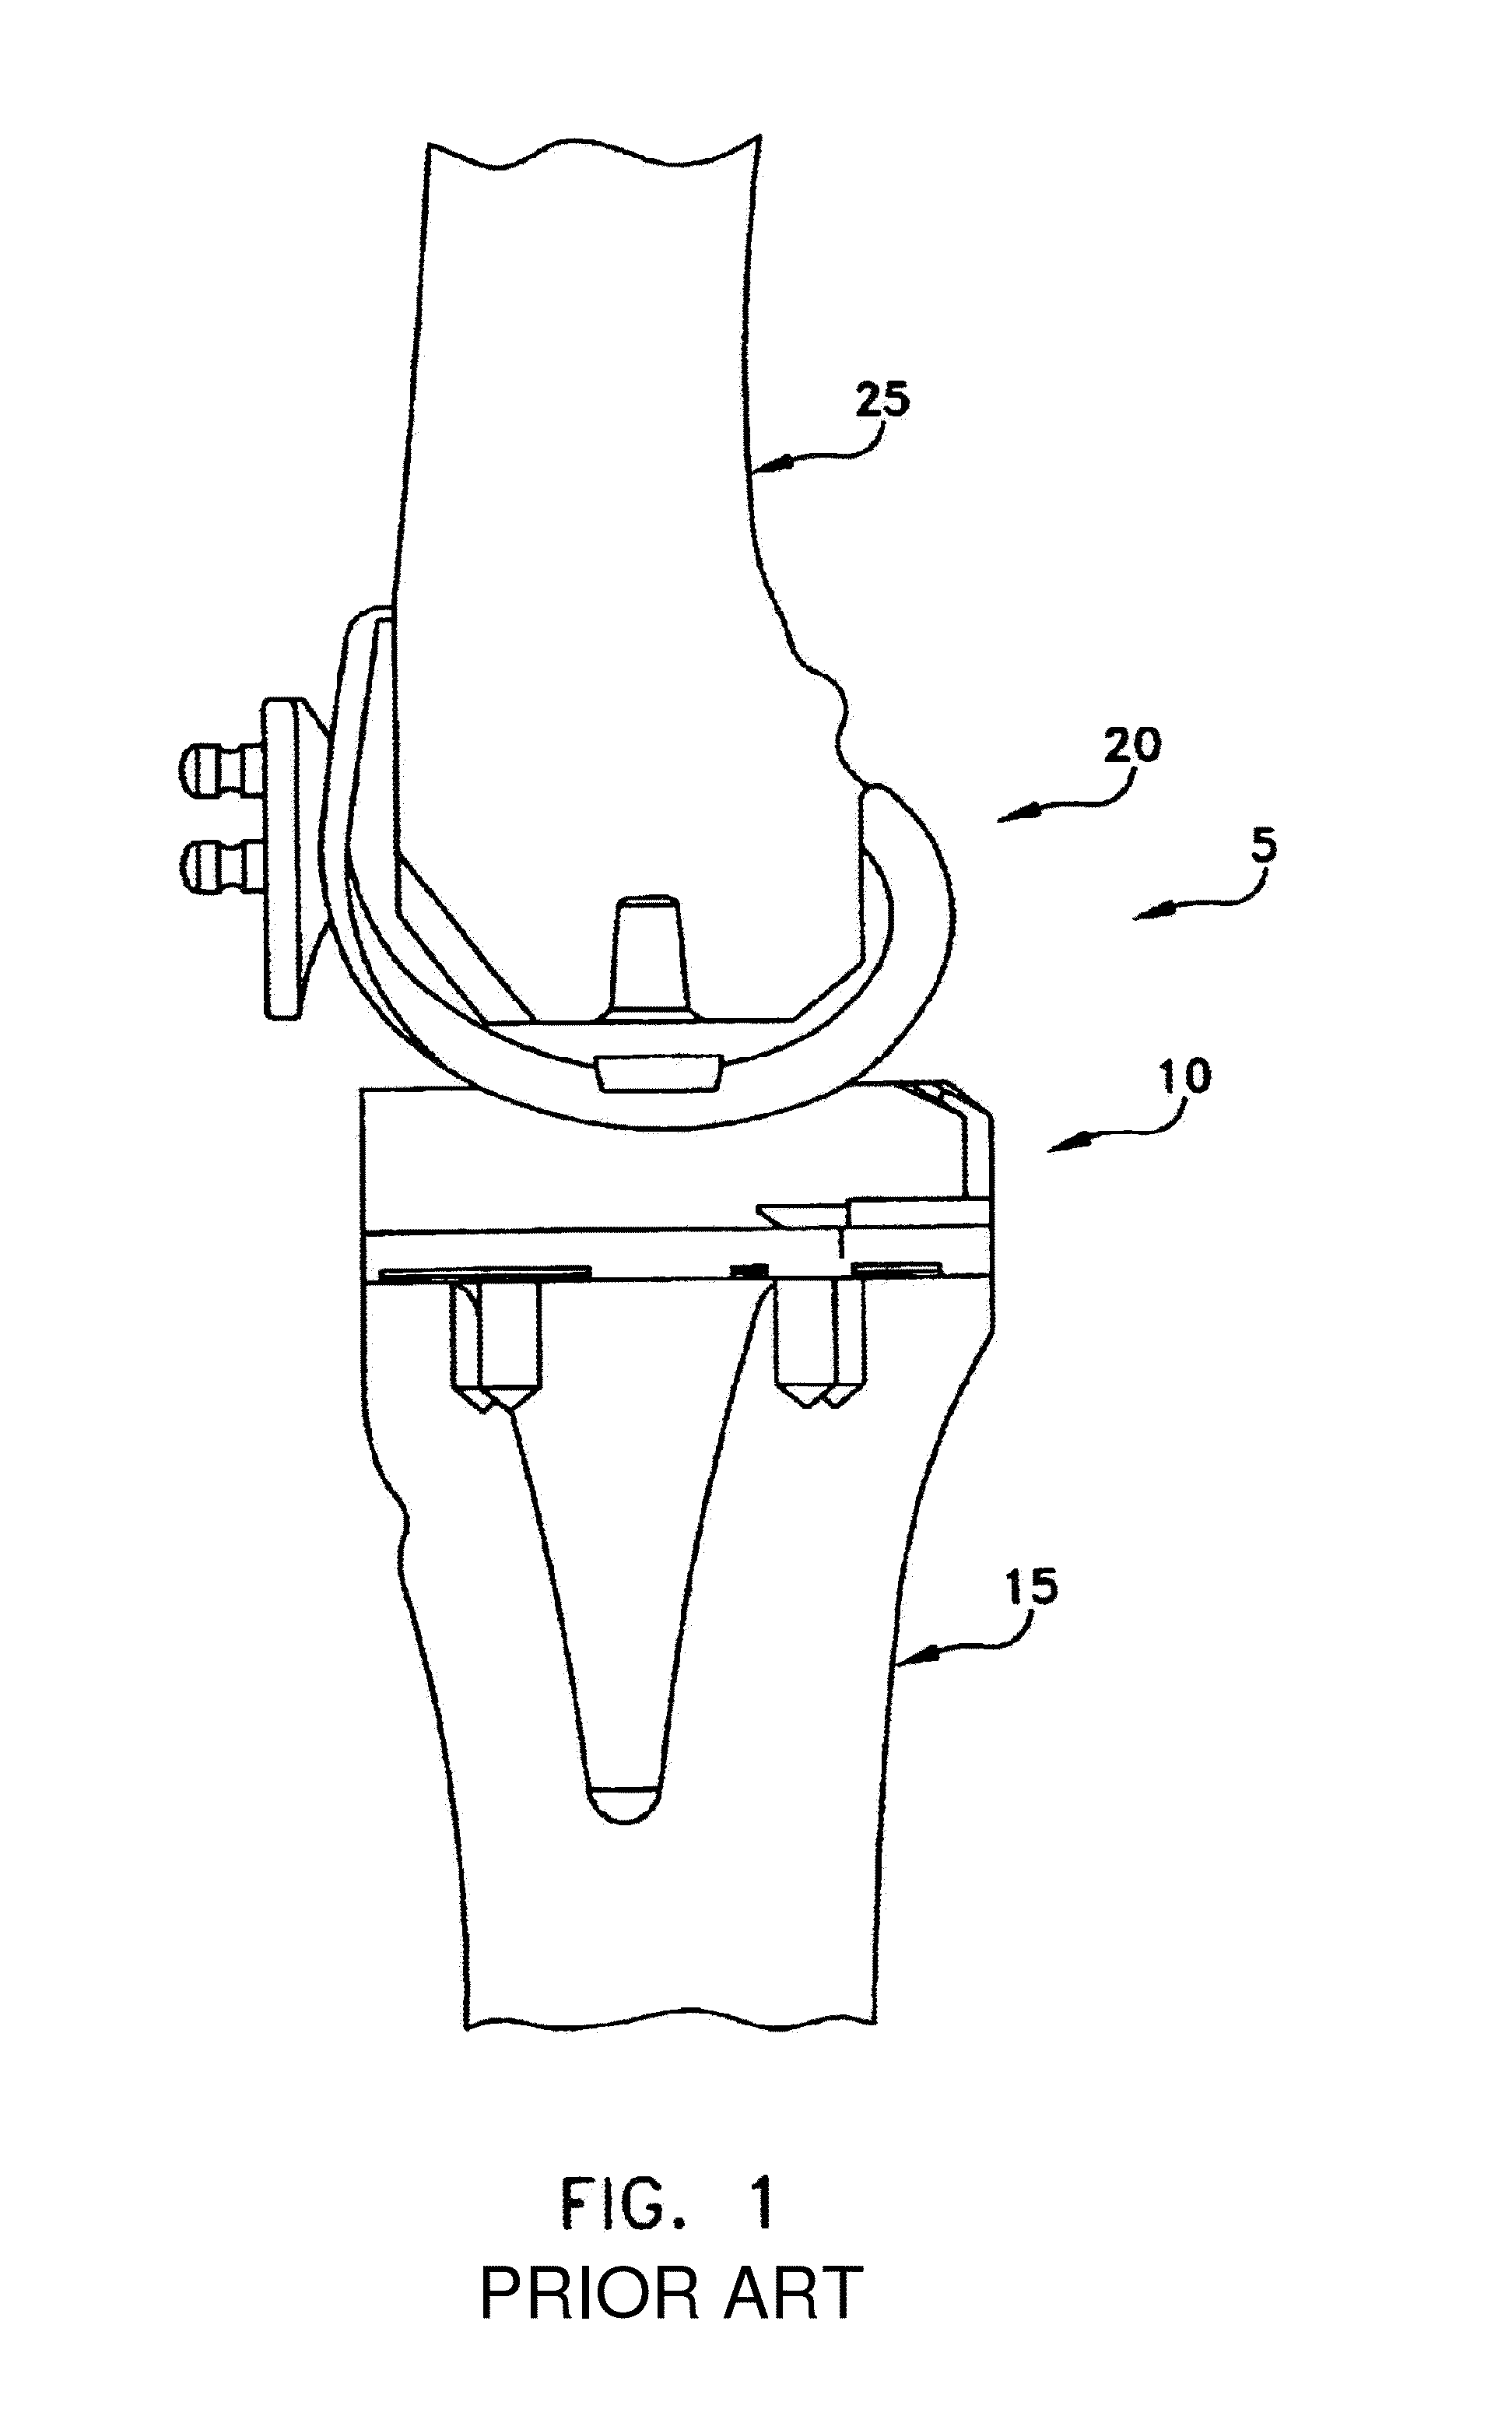 Tibial baseplate assembly for knee joint prosthesis